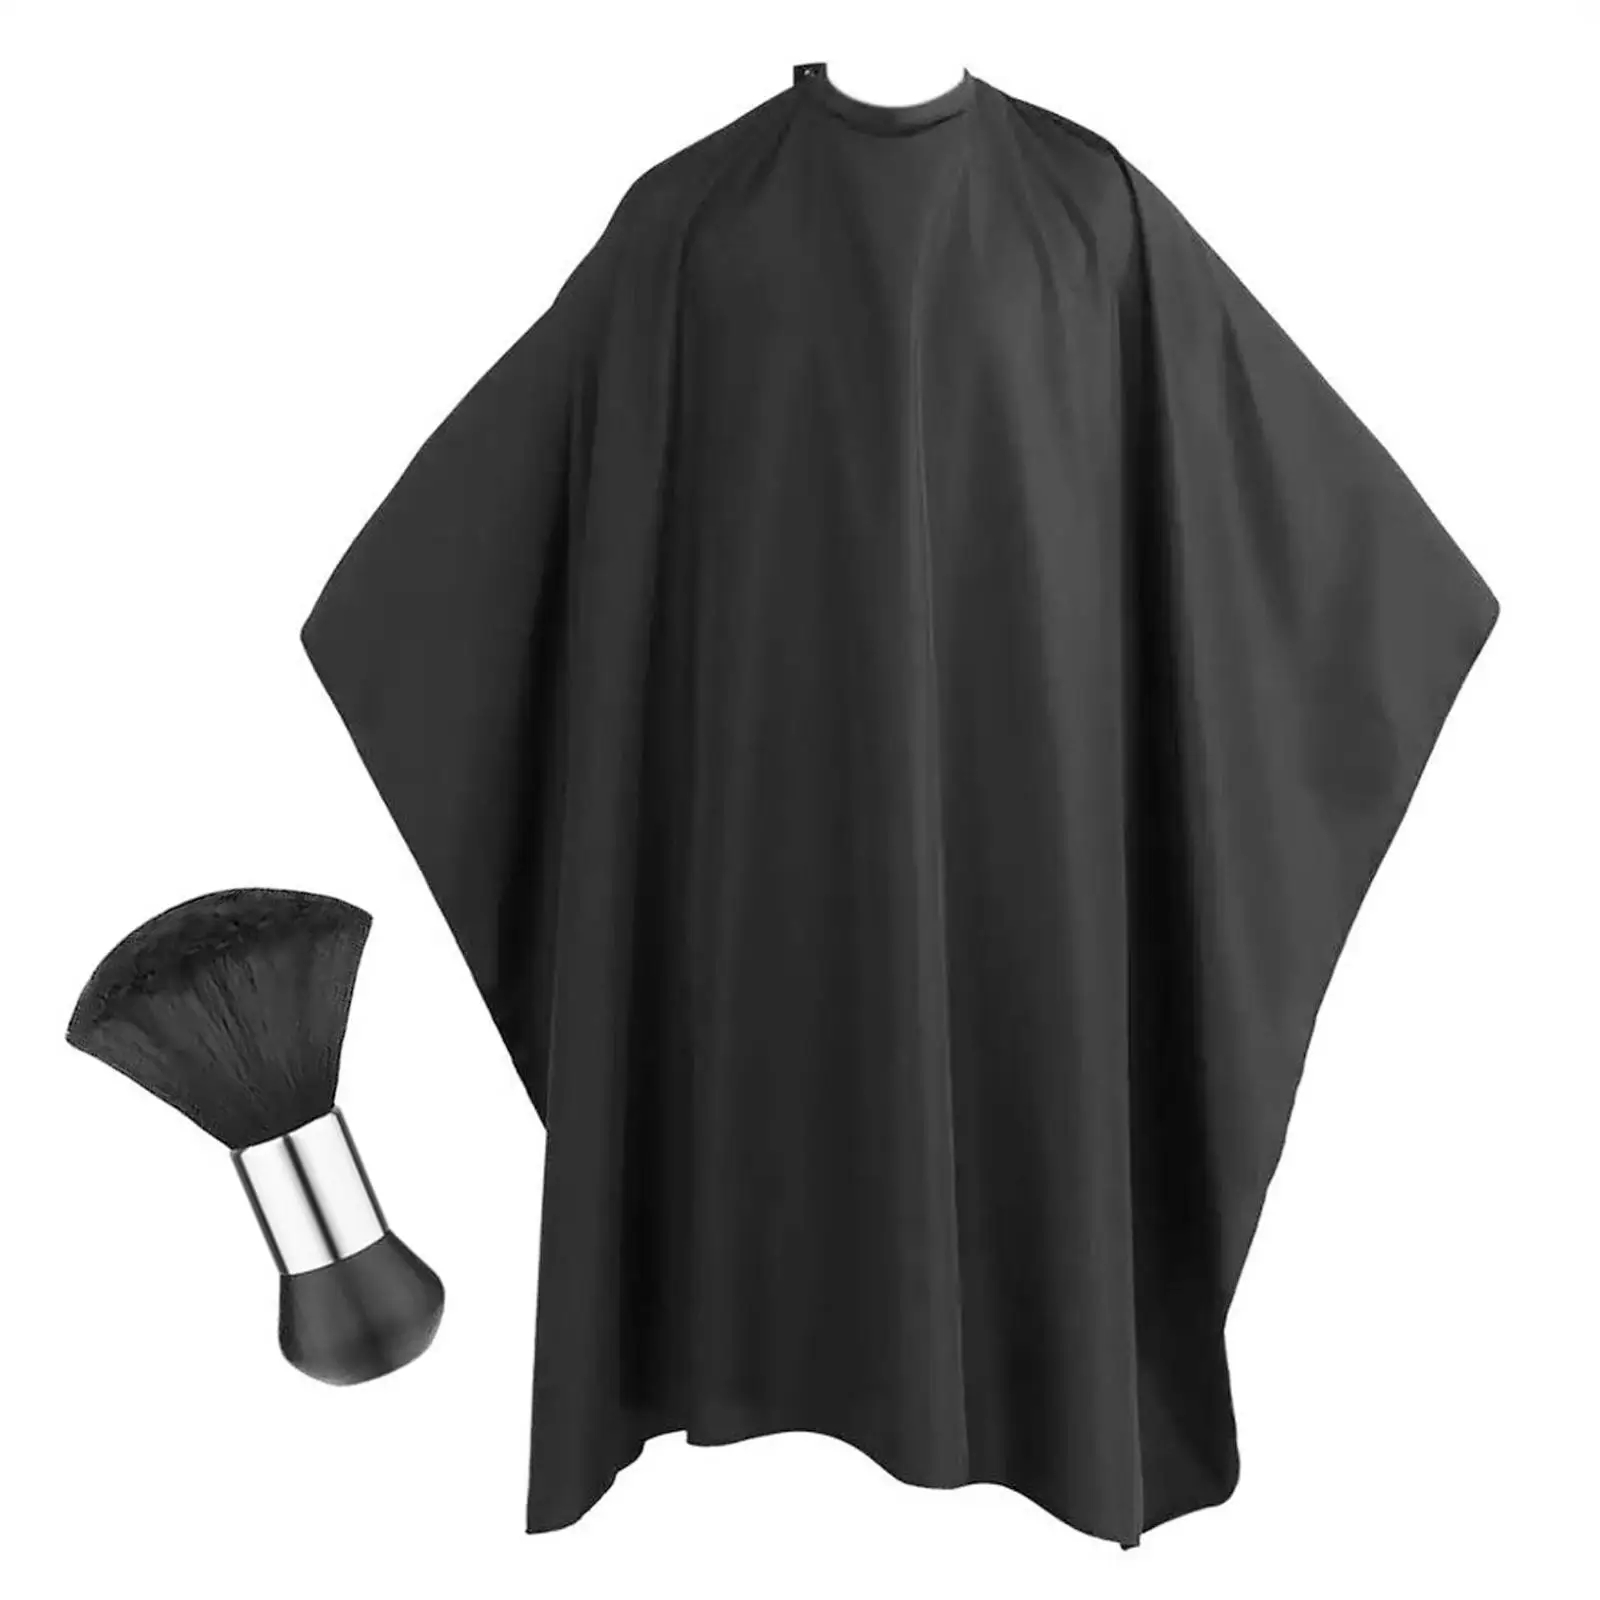 Hair Cutting Salon Cape Water Resistant Black Hairdresser Cape for Men Women and Children Hairdressing Cosmetology Supplies